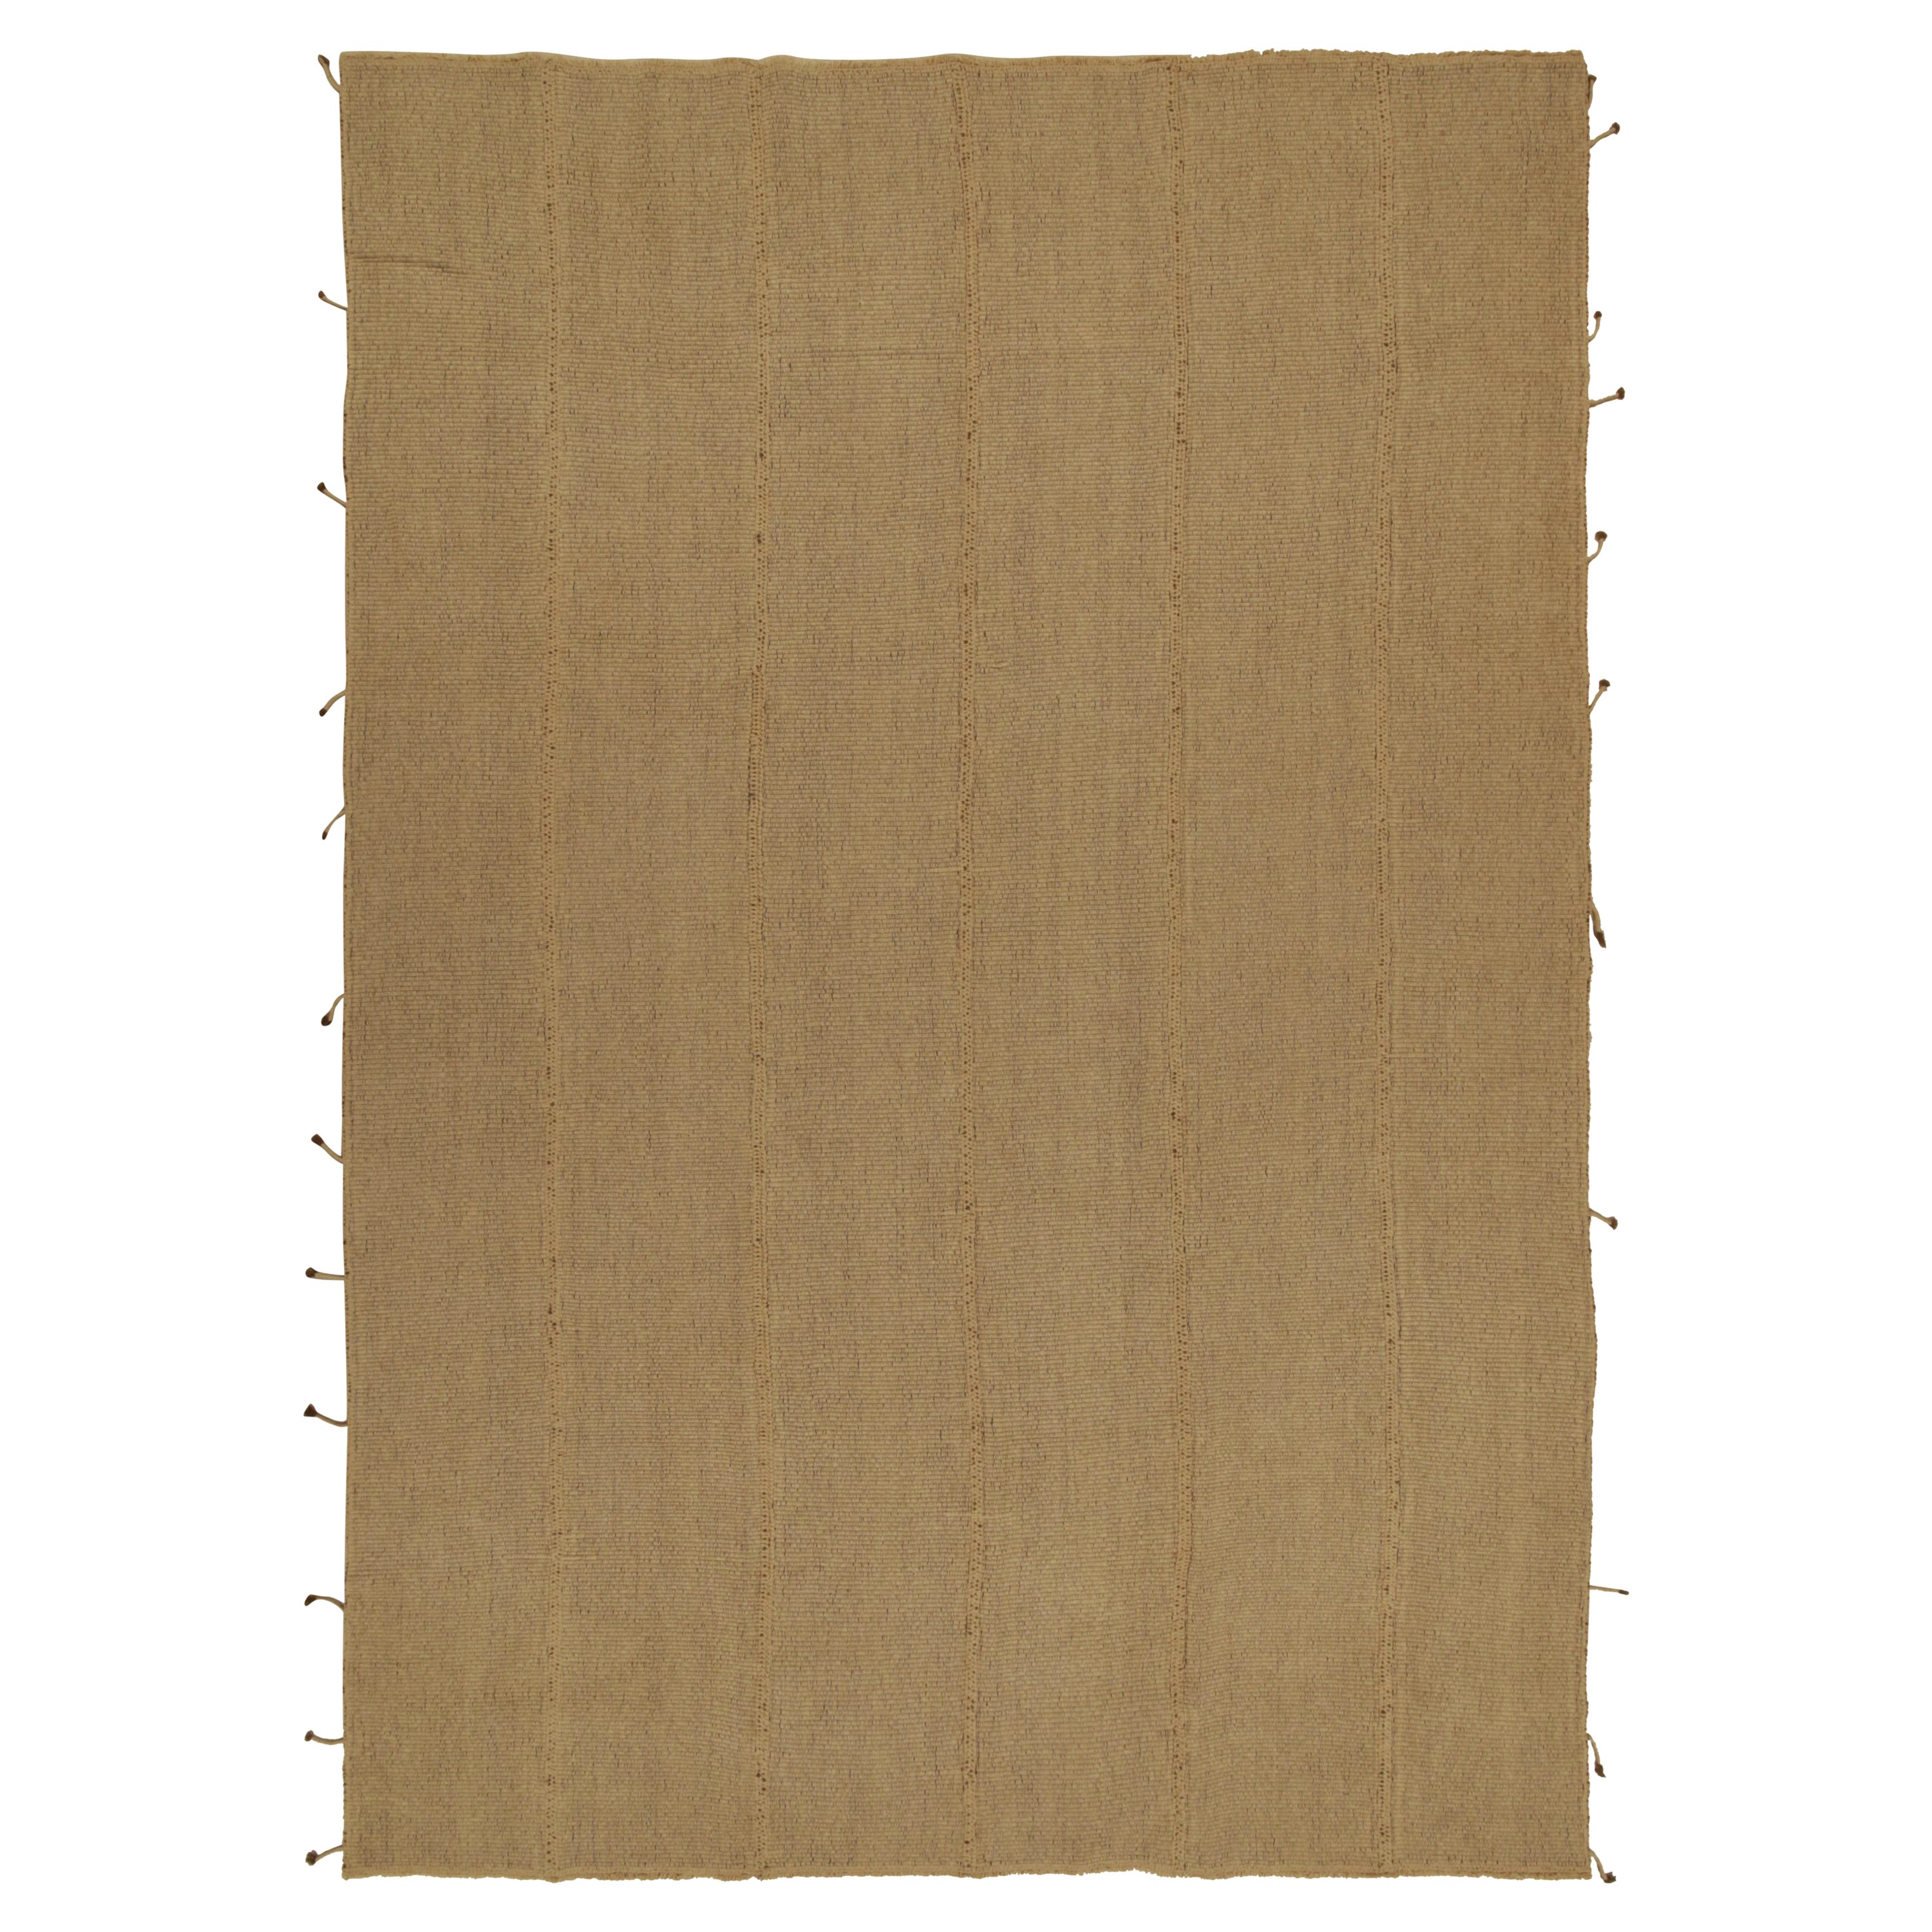 Rug & Kilim’s Contemporary Kilim in Sandy, Solid Beige-Brown Panel Woven Style For Sale